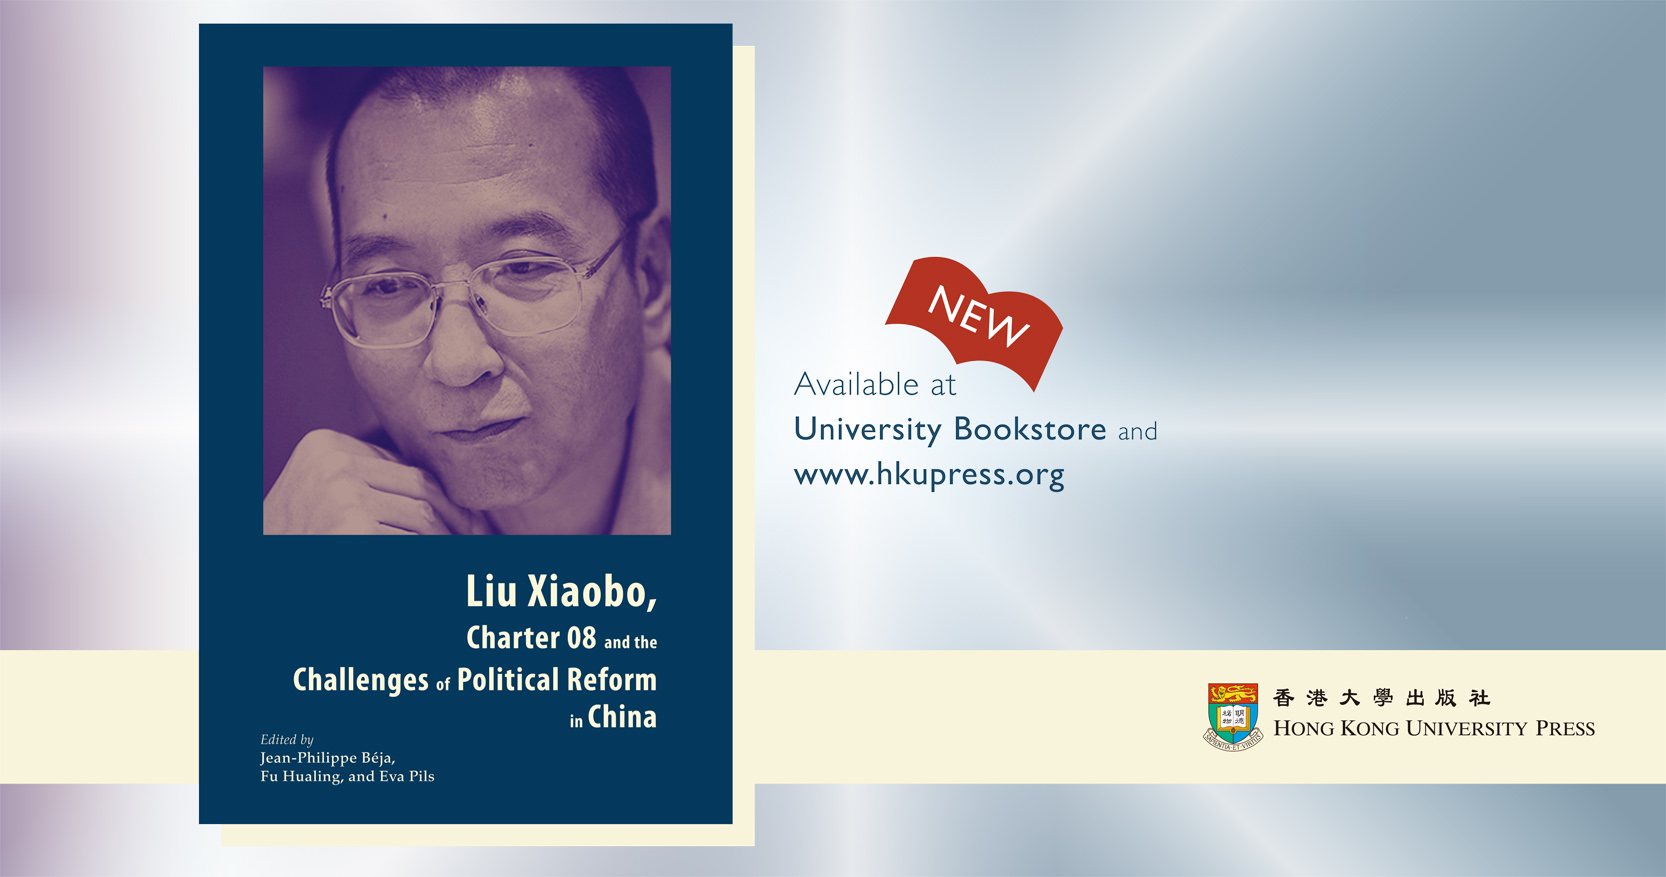 Liu Xiaobo (劉曉波) was awarded the Nobel Peace Prize in 2010...